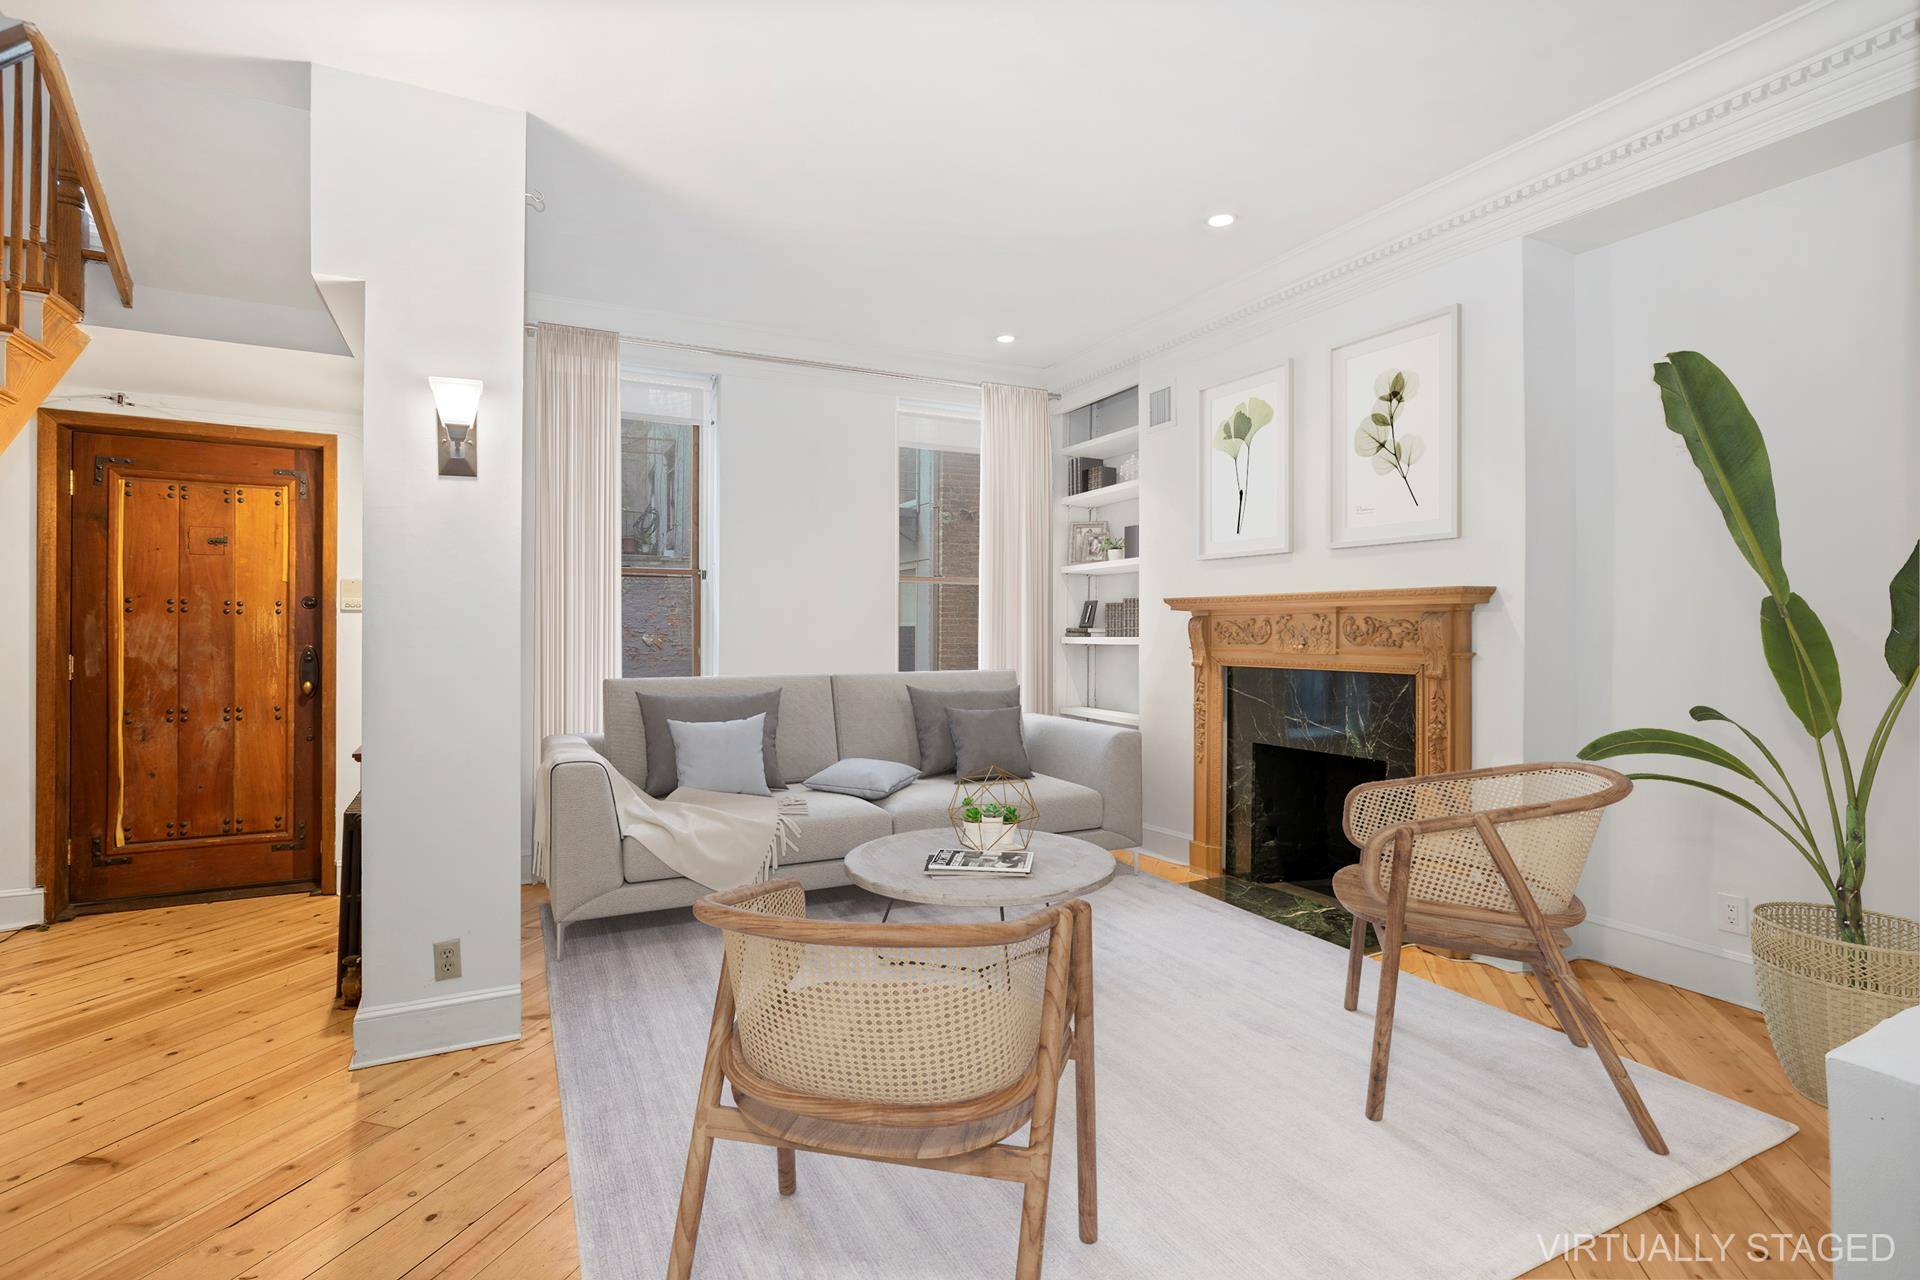 Located on one of the most charming streets in Greenwich Village, 1 Minetta Lane is tucked away from the hustle and bustle of vibrant Manhattan, this triplex home featuring three ...